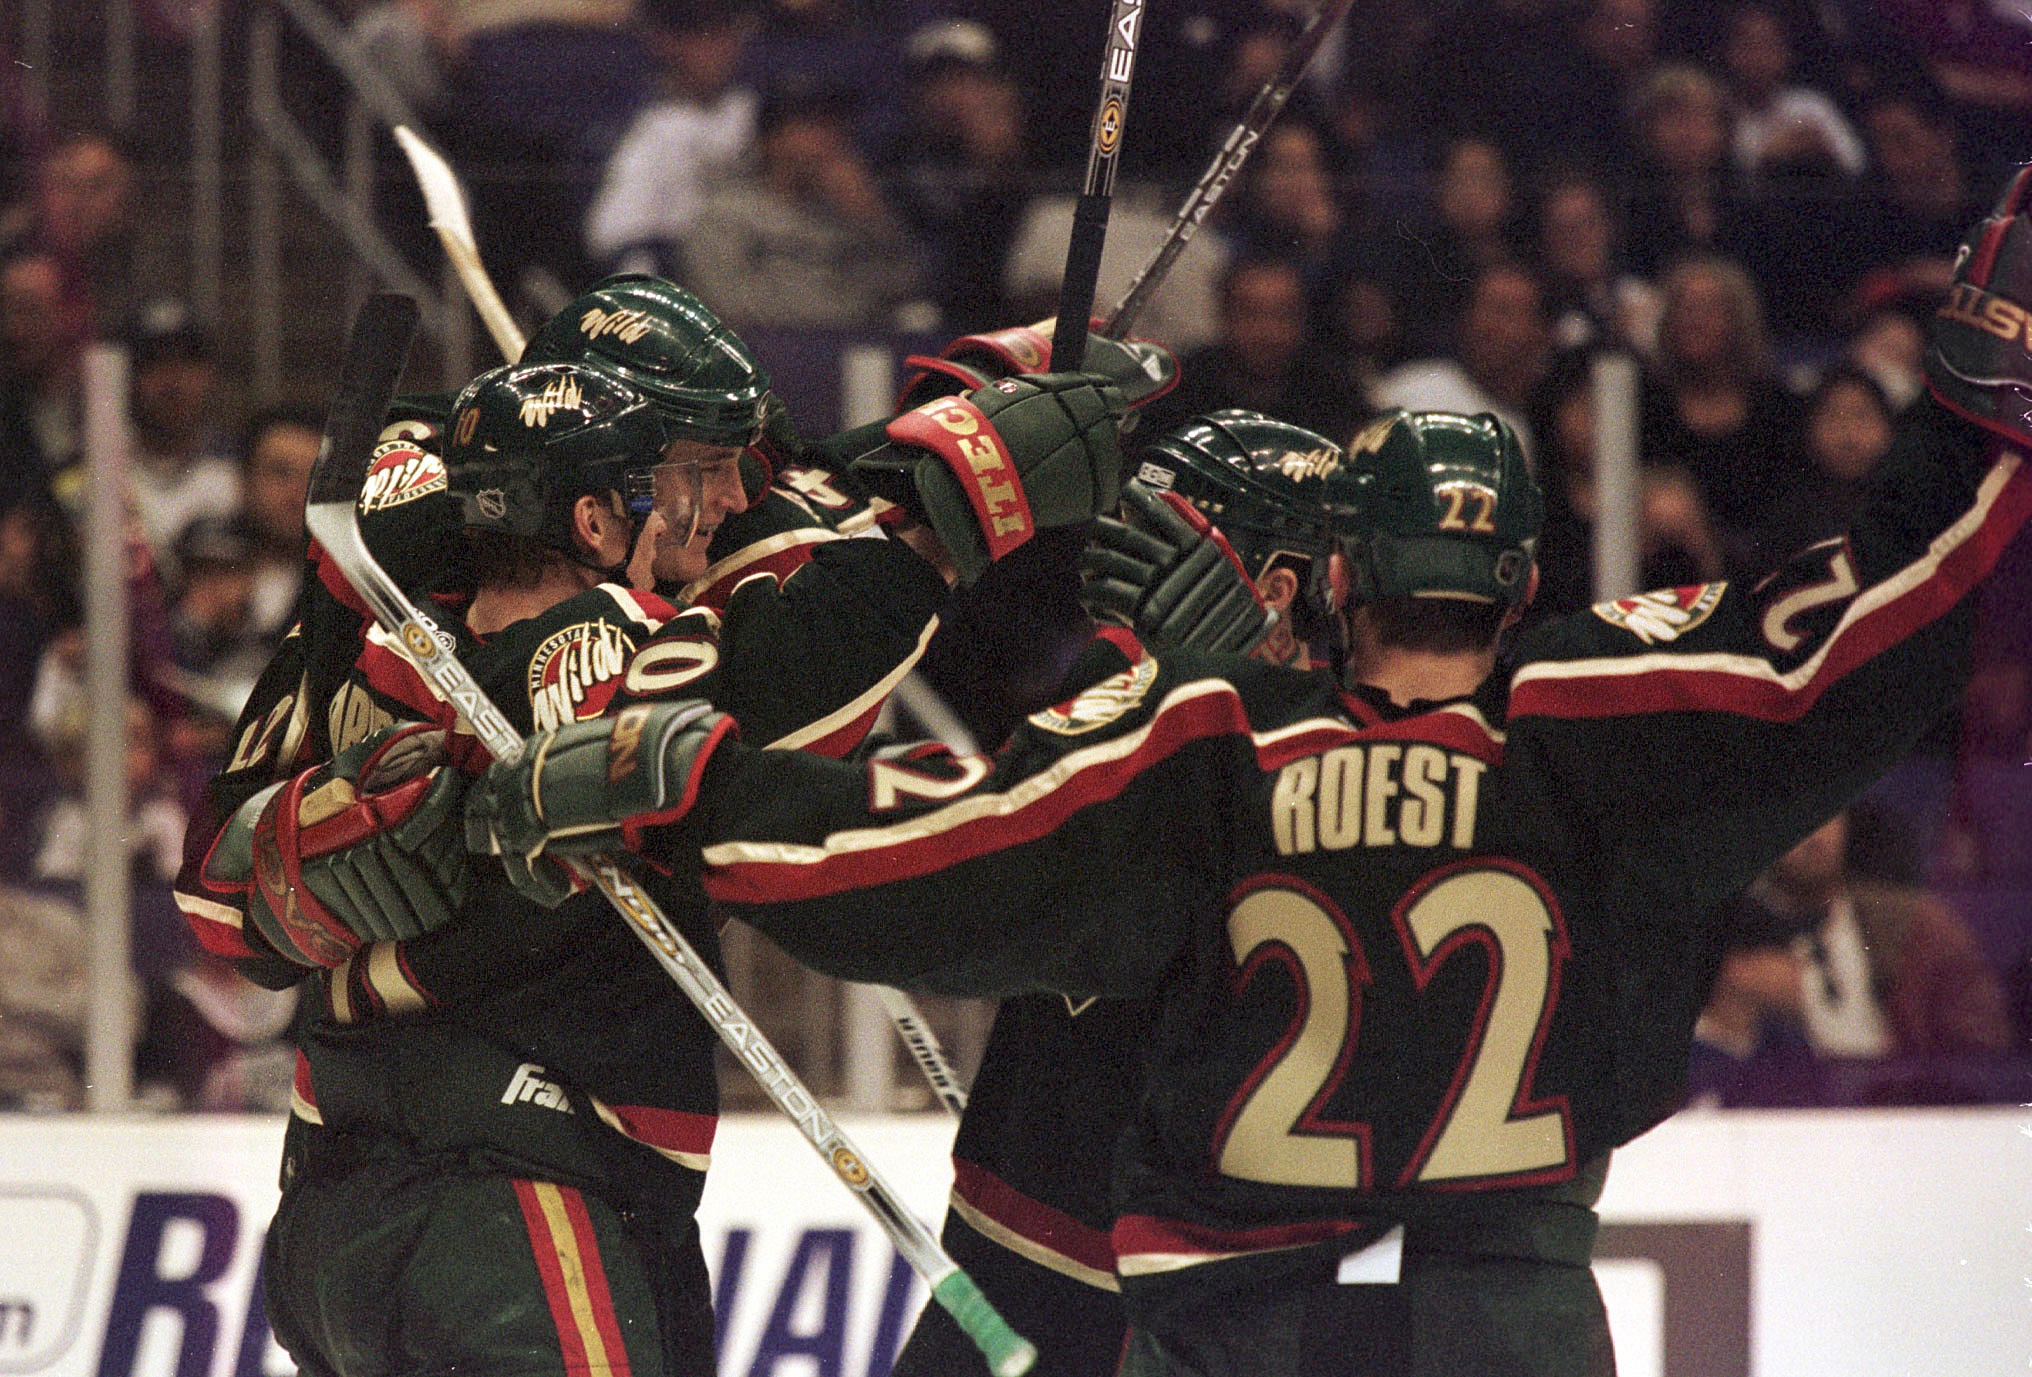 The rise and fall of the Minnesota North Stars